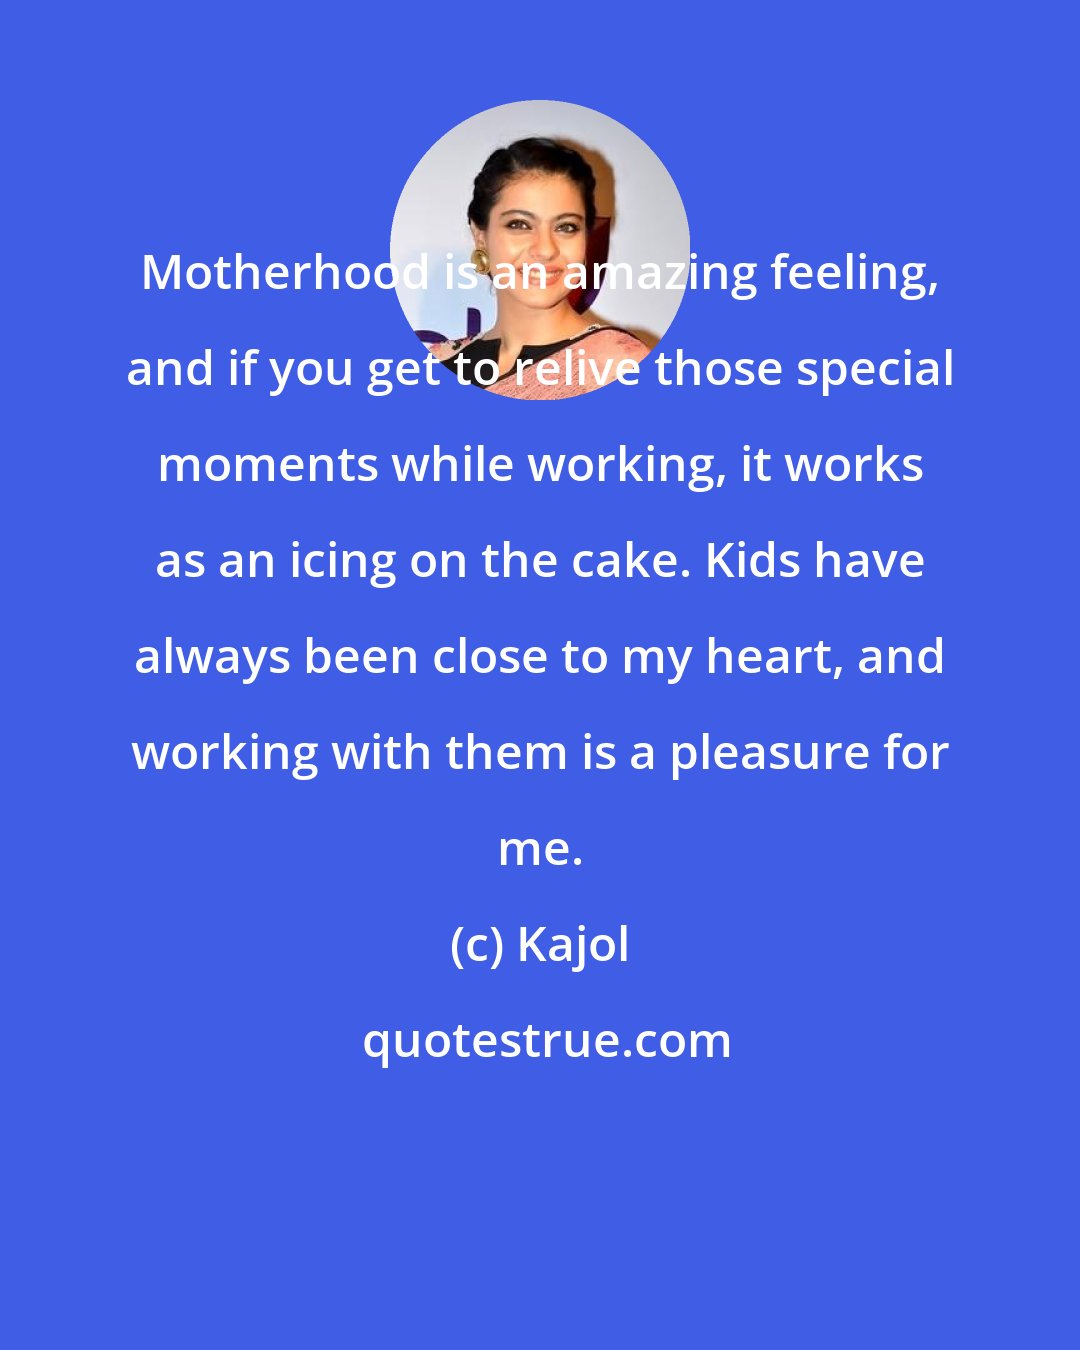 Kajol: Motherhood is an amazing feeling, and if you get to relive those special moments while working, it works as an icing on the cake. Kids have always been close to my heart, and working with them is a pleasure for me.